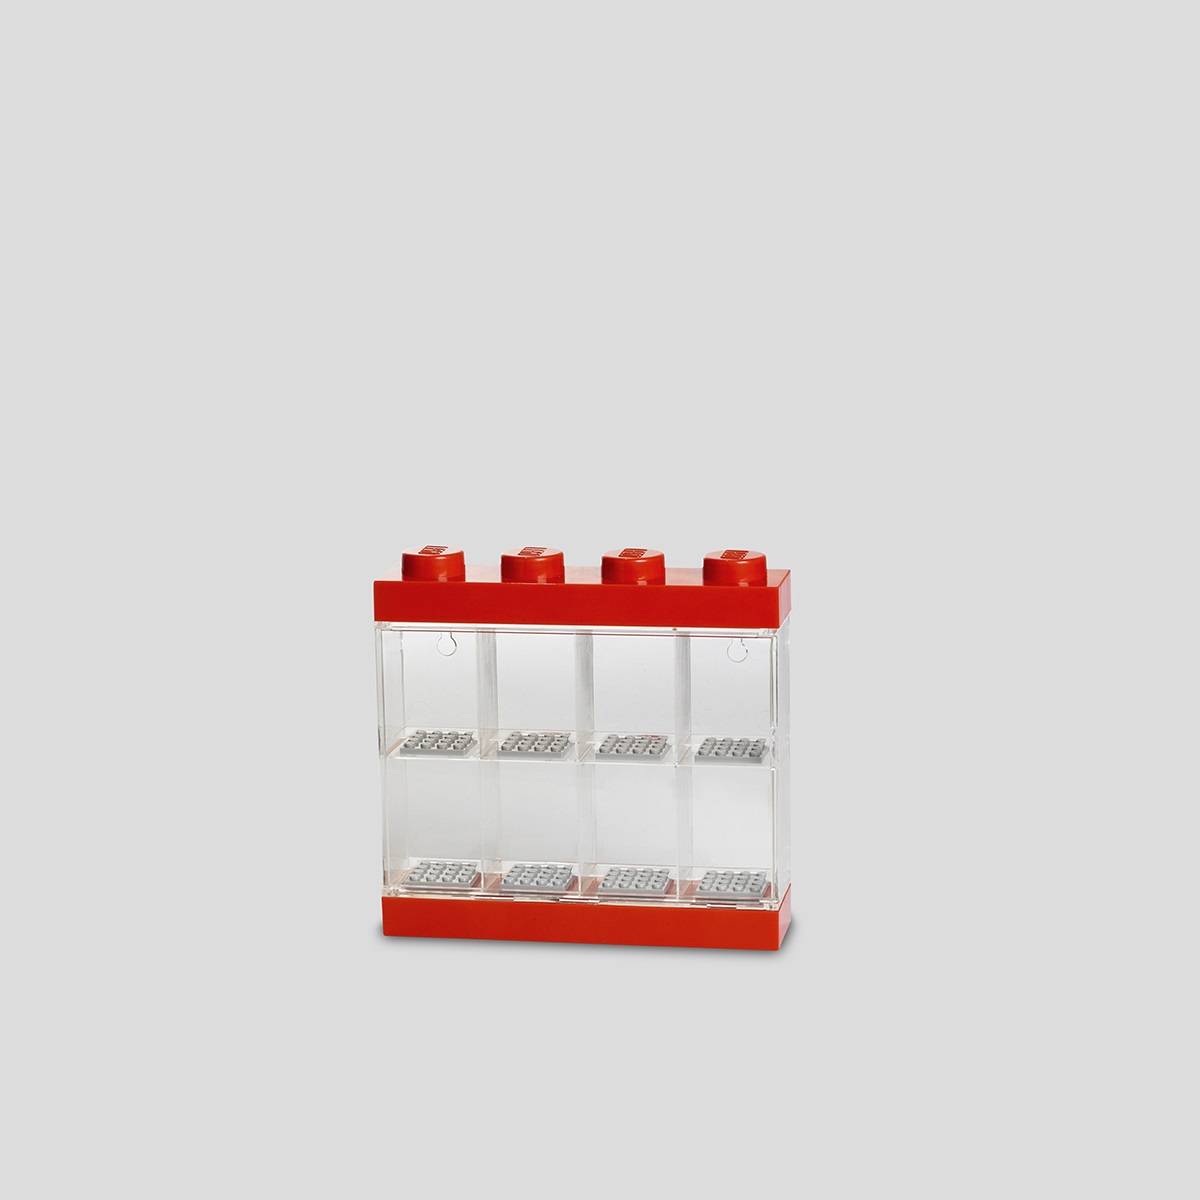 0887988003816 - MINIFIGURE DISPLAY CASE 8, BRIGHT RED